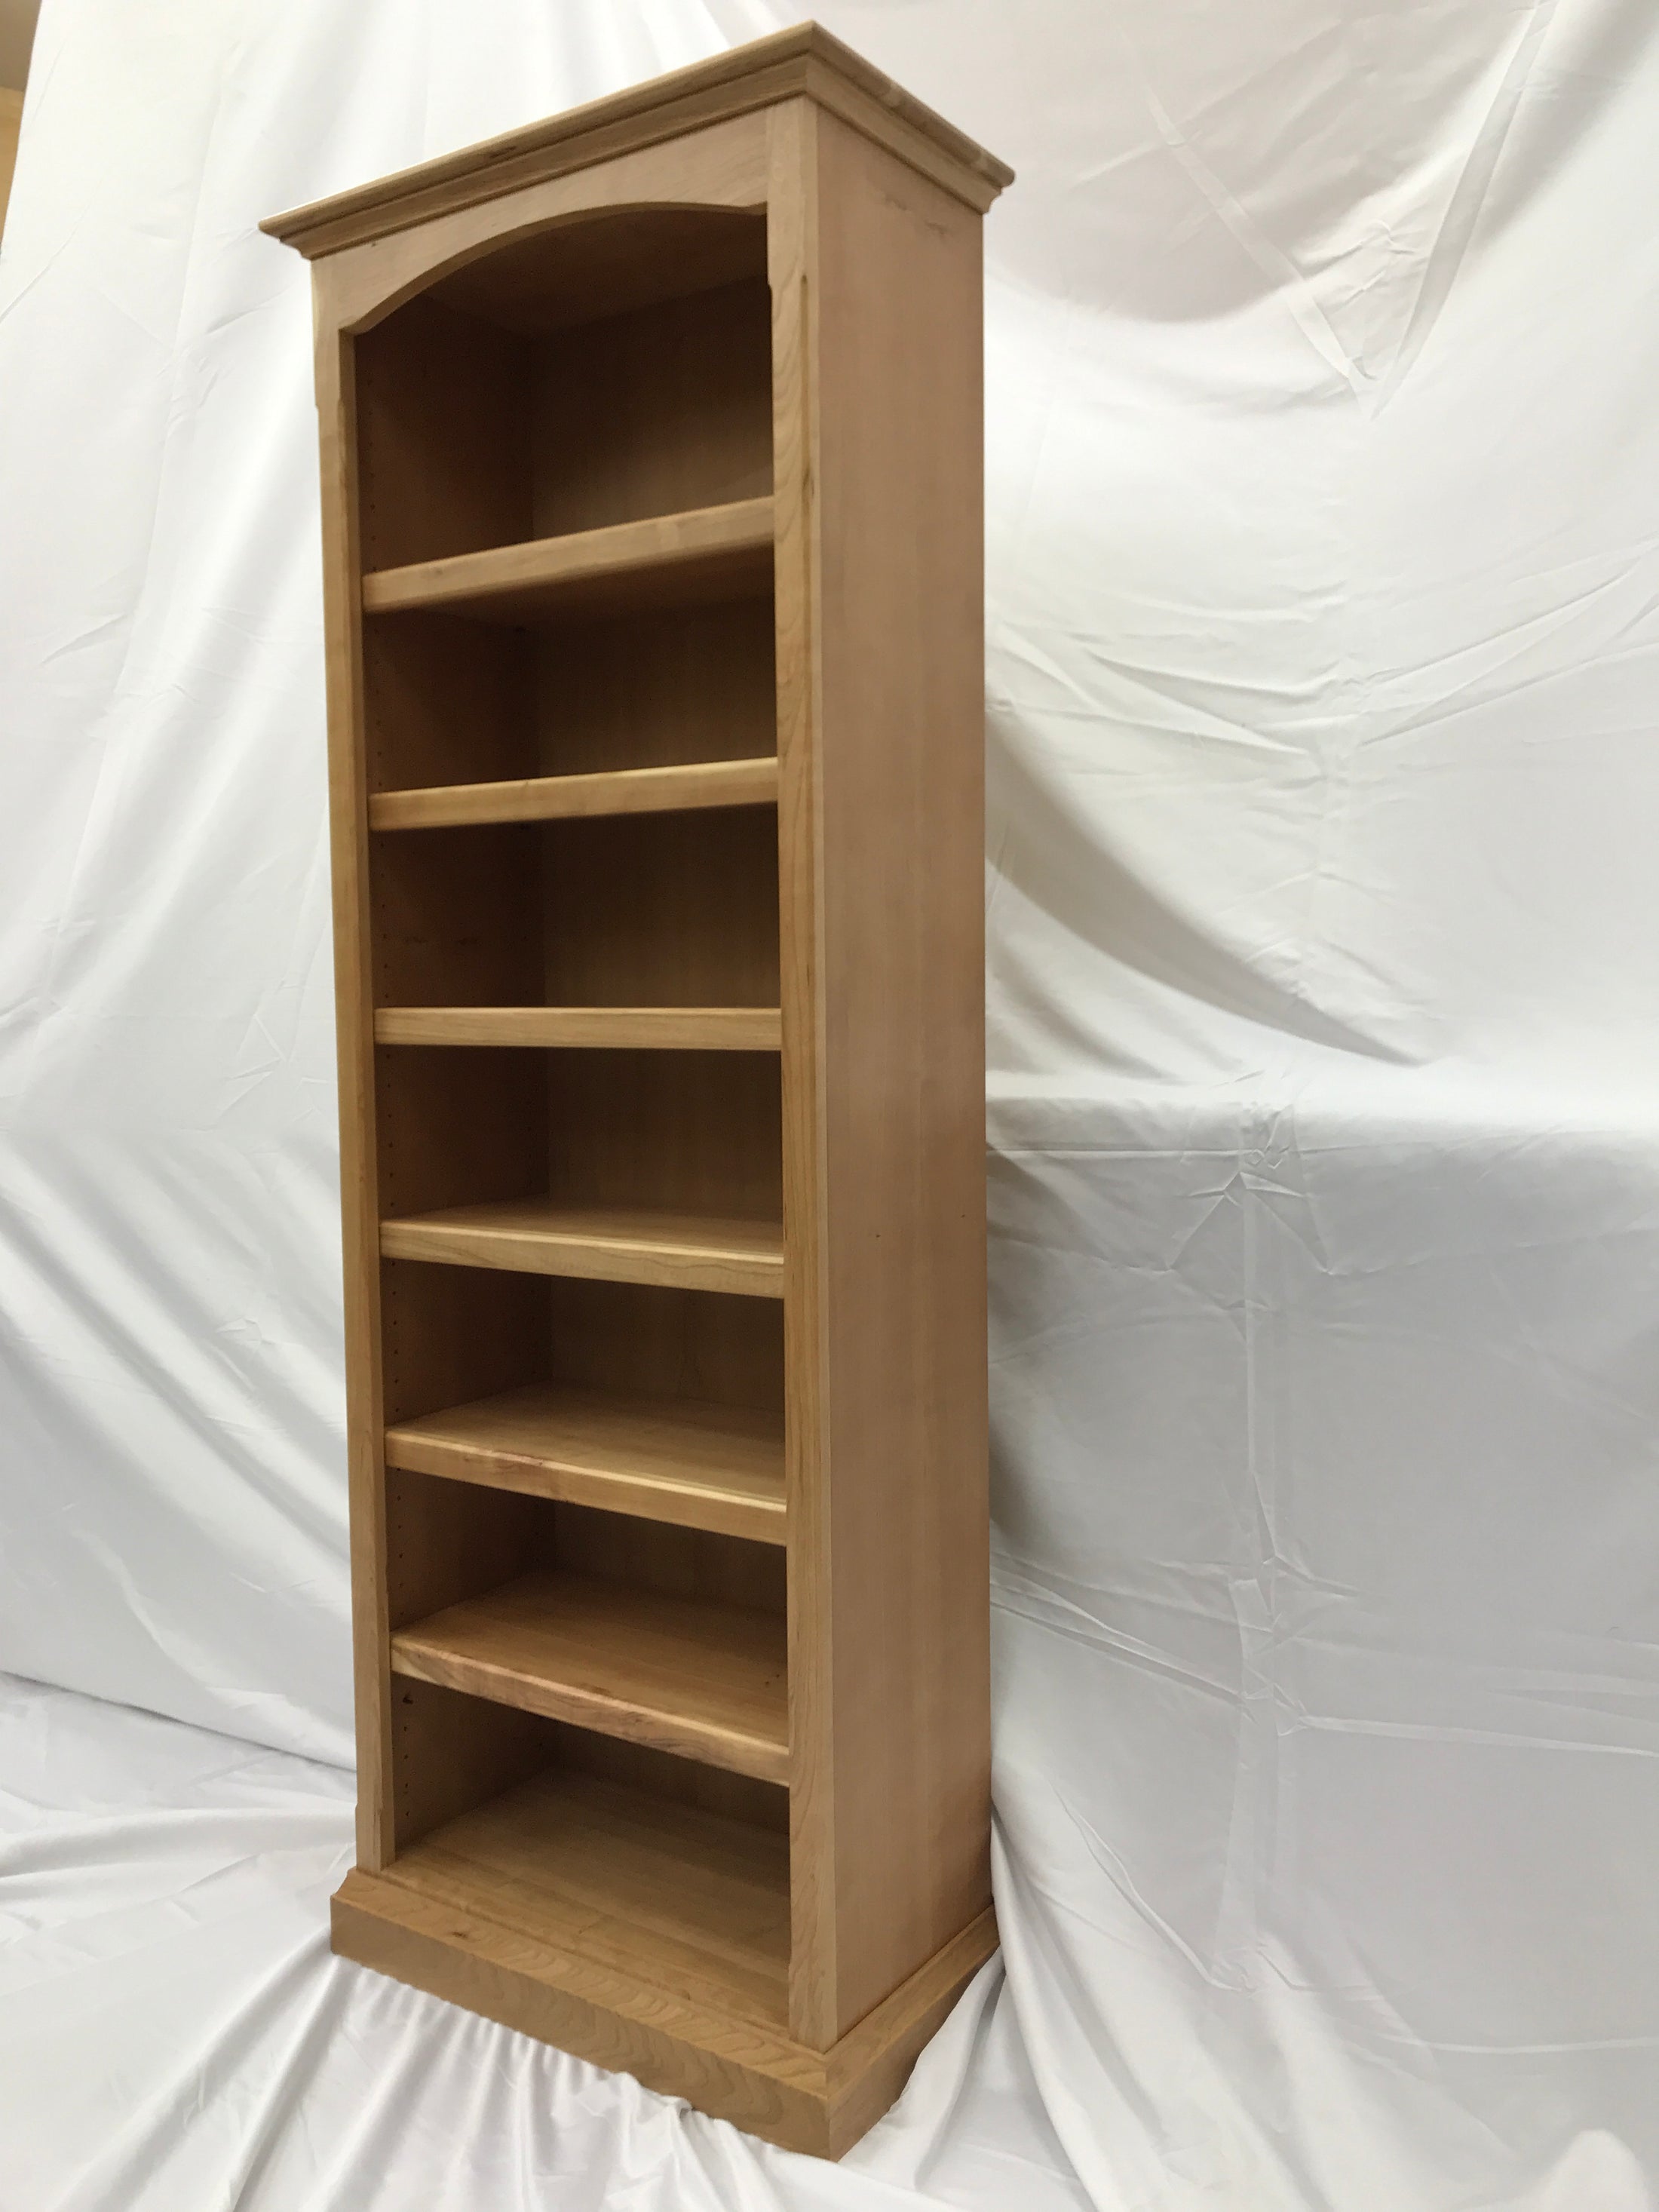 Standard Bookcase 6' tall 2' wide 3D Plans